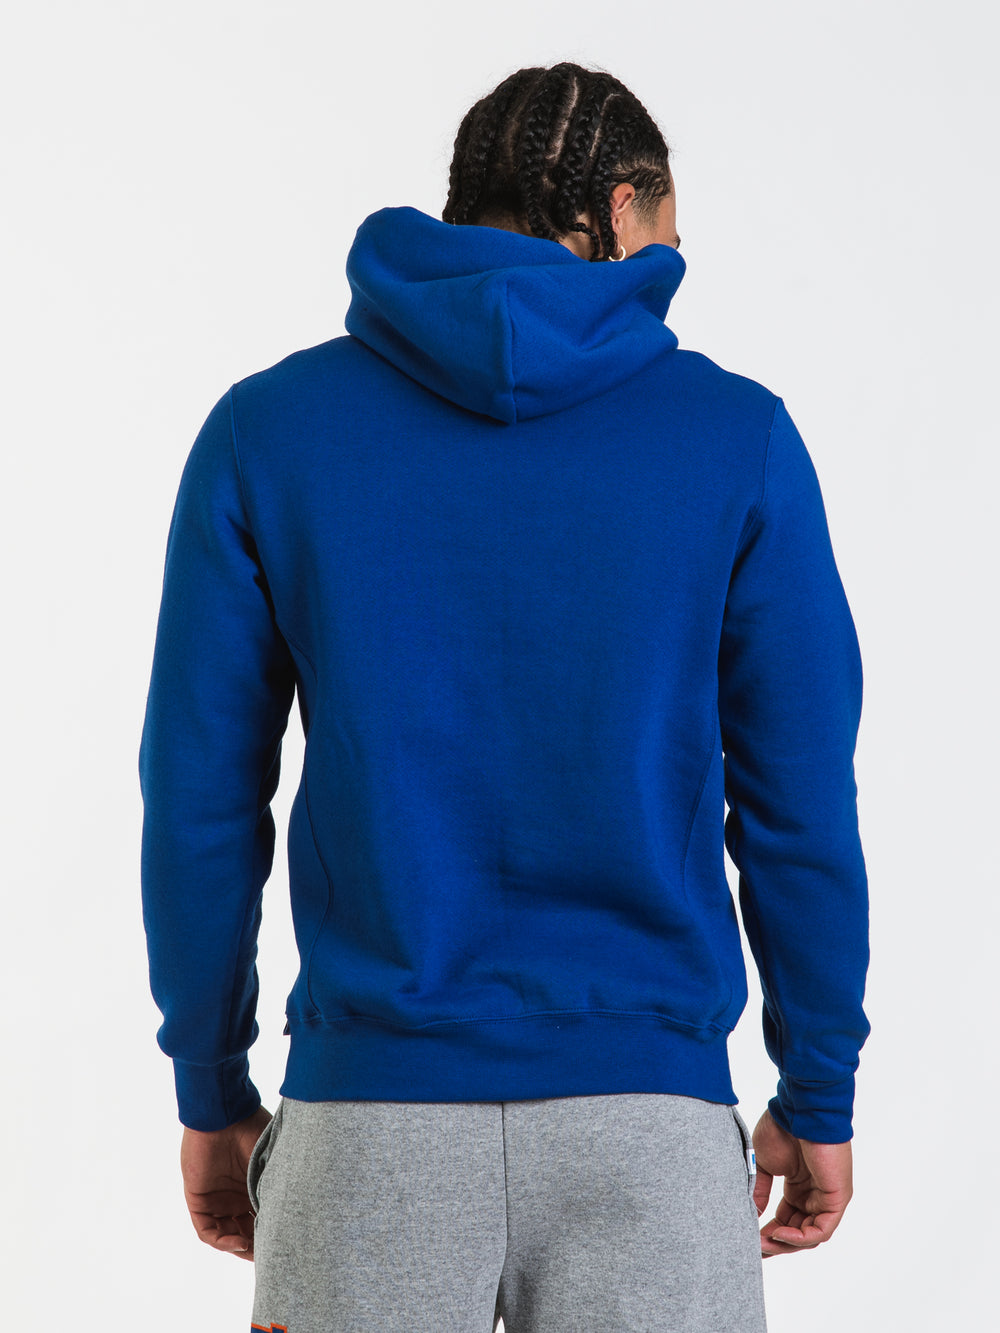 RUSSELL UNIVERSITY OF FLORIDA HOODIE - CLEARANCE